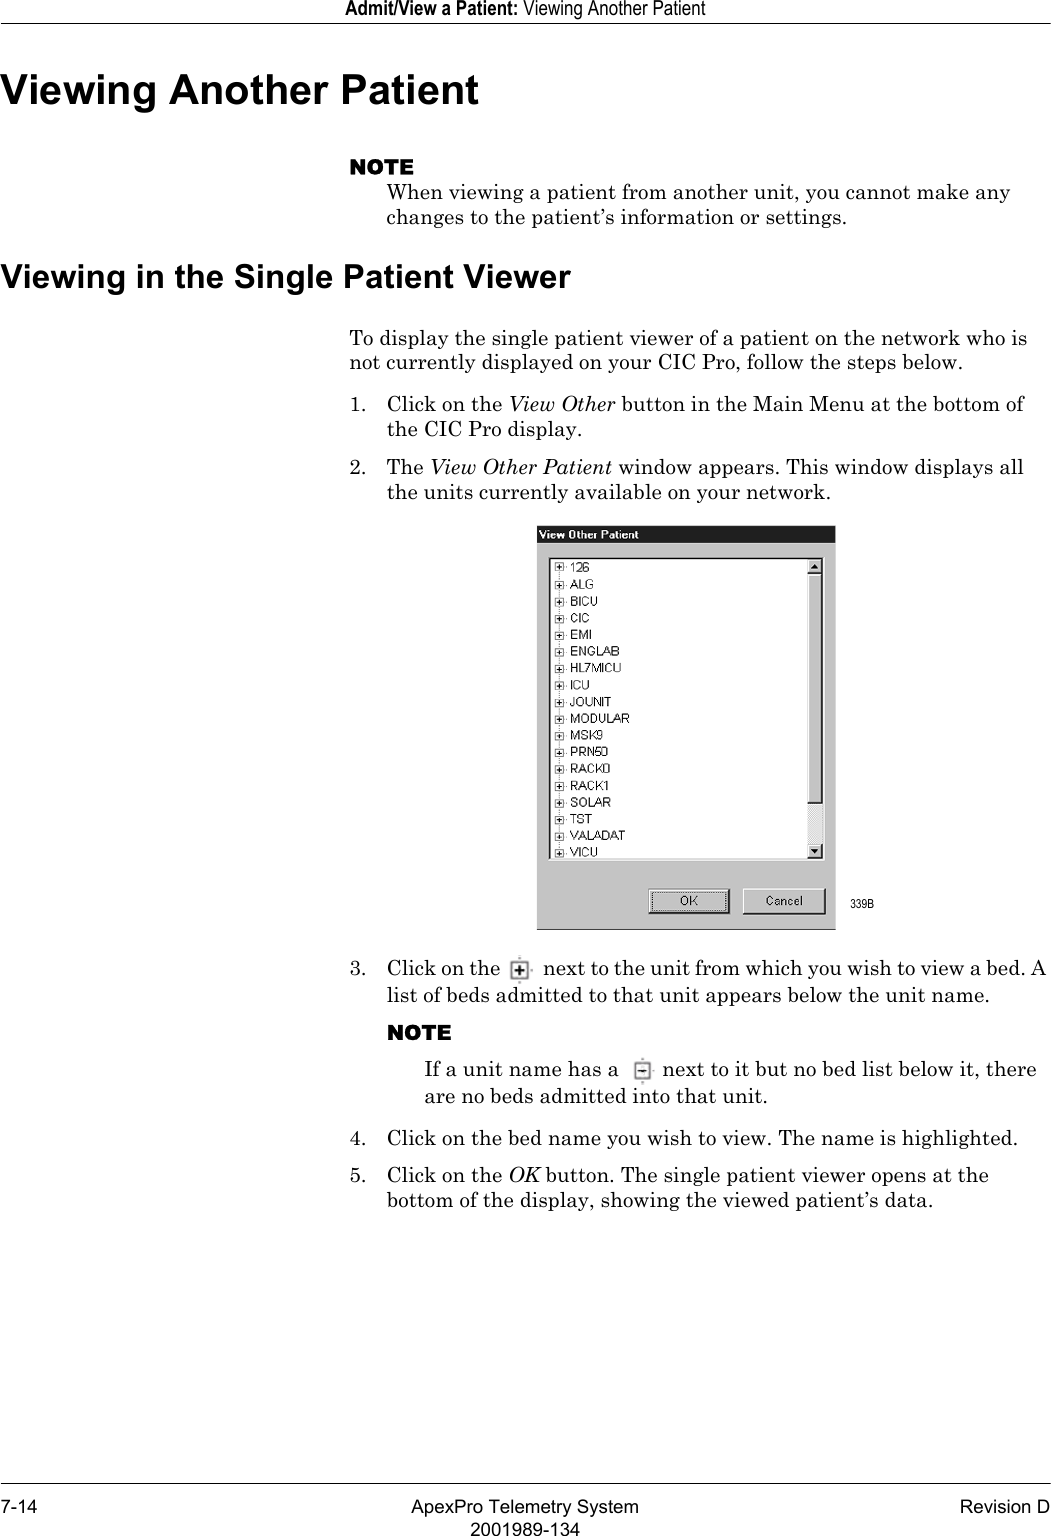 7-14 ApexPro Telemetry System Revision D2001989-134Admit/View a Patient: Viewing Another PatientViewing Another PatientNOTEWhen viewing a patient from another unit, you cannot make any changes to the patient’s information or settings.Viewing in the Single Patient ViewerTo display the single patient viewer of a patient on the network who is not currently displayed on your CIC Pro, follow the steps below.1. Click on the View Other button in the Main Menu at the bottom of the CIC Pro display.2. The View Other Patient window appears. This window displays all the units currently available on your network.3. Click on the  next to the unit from which you wish to view a bed. A list of beds admitted to that unit appears below the unit name.NOTEIf a unit name has a  next to it but no bed list below it, there are no beds admitted into that unit.4. Click on the bed name you wish to view. The name is highlighted.5. Click on the OK button. The single patient viewer opens at the bottom of the display, showing the viewed patient’s data. 339B